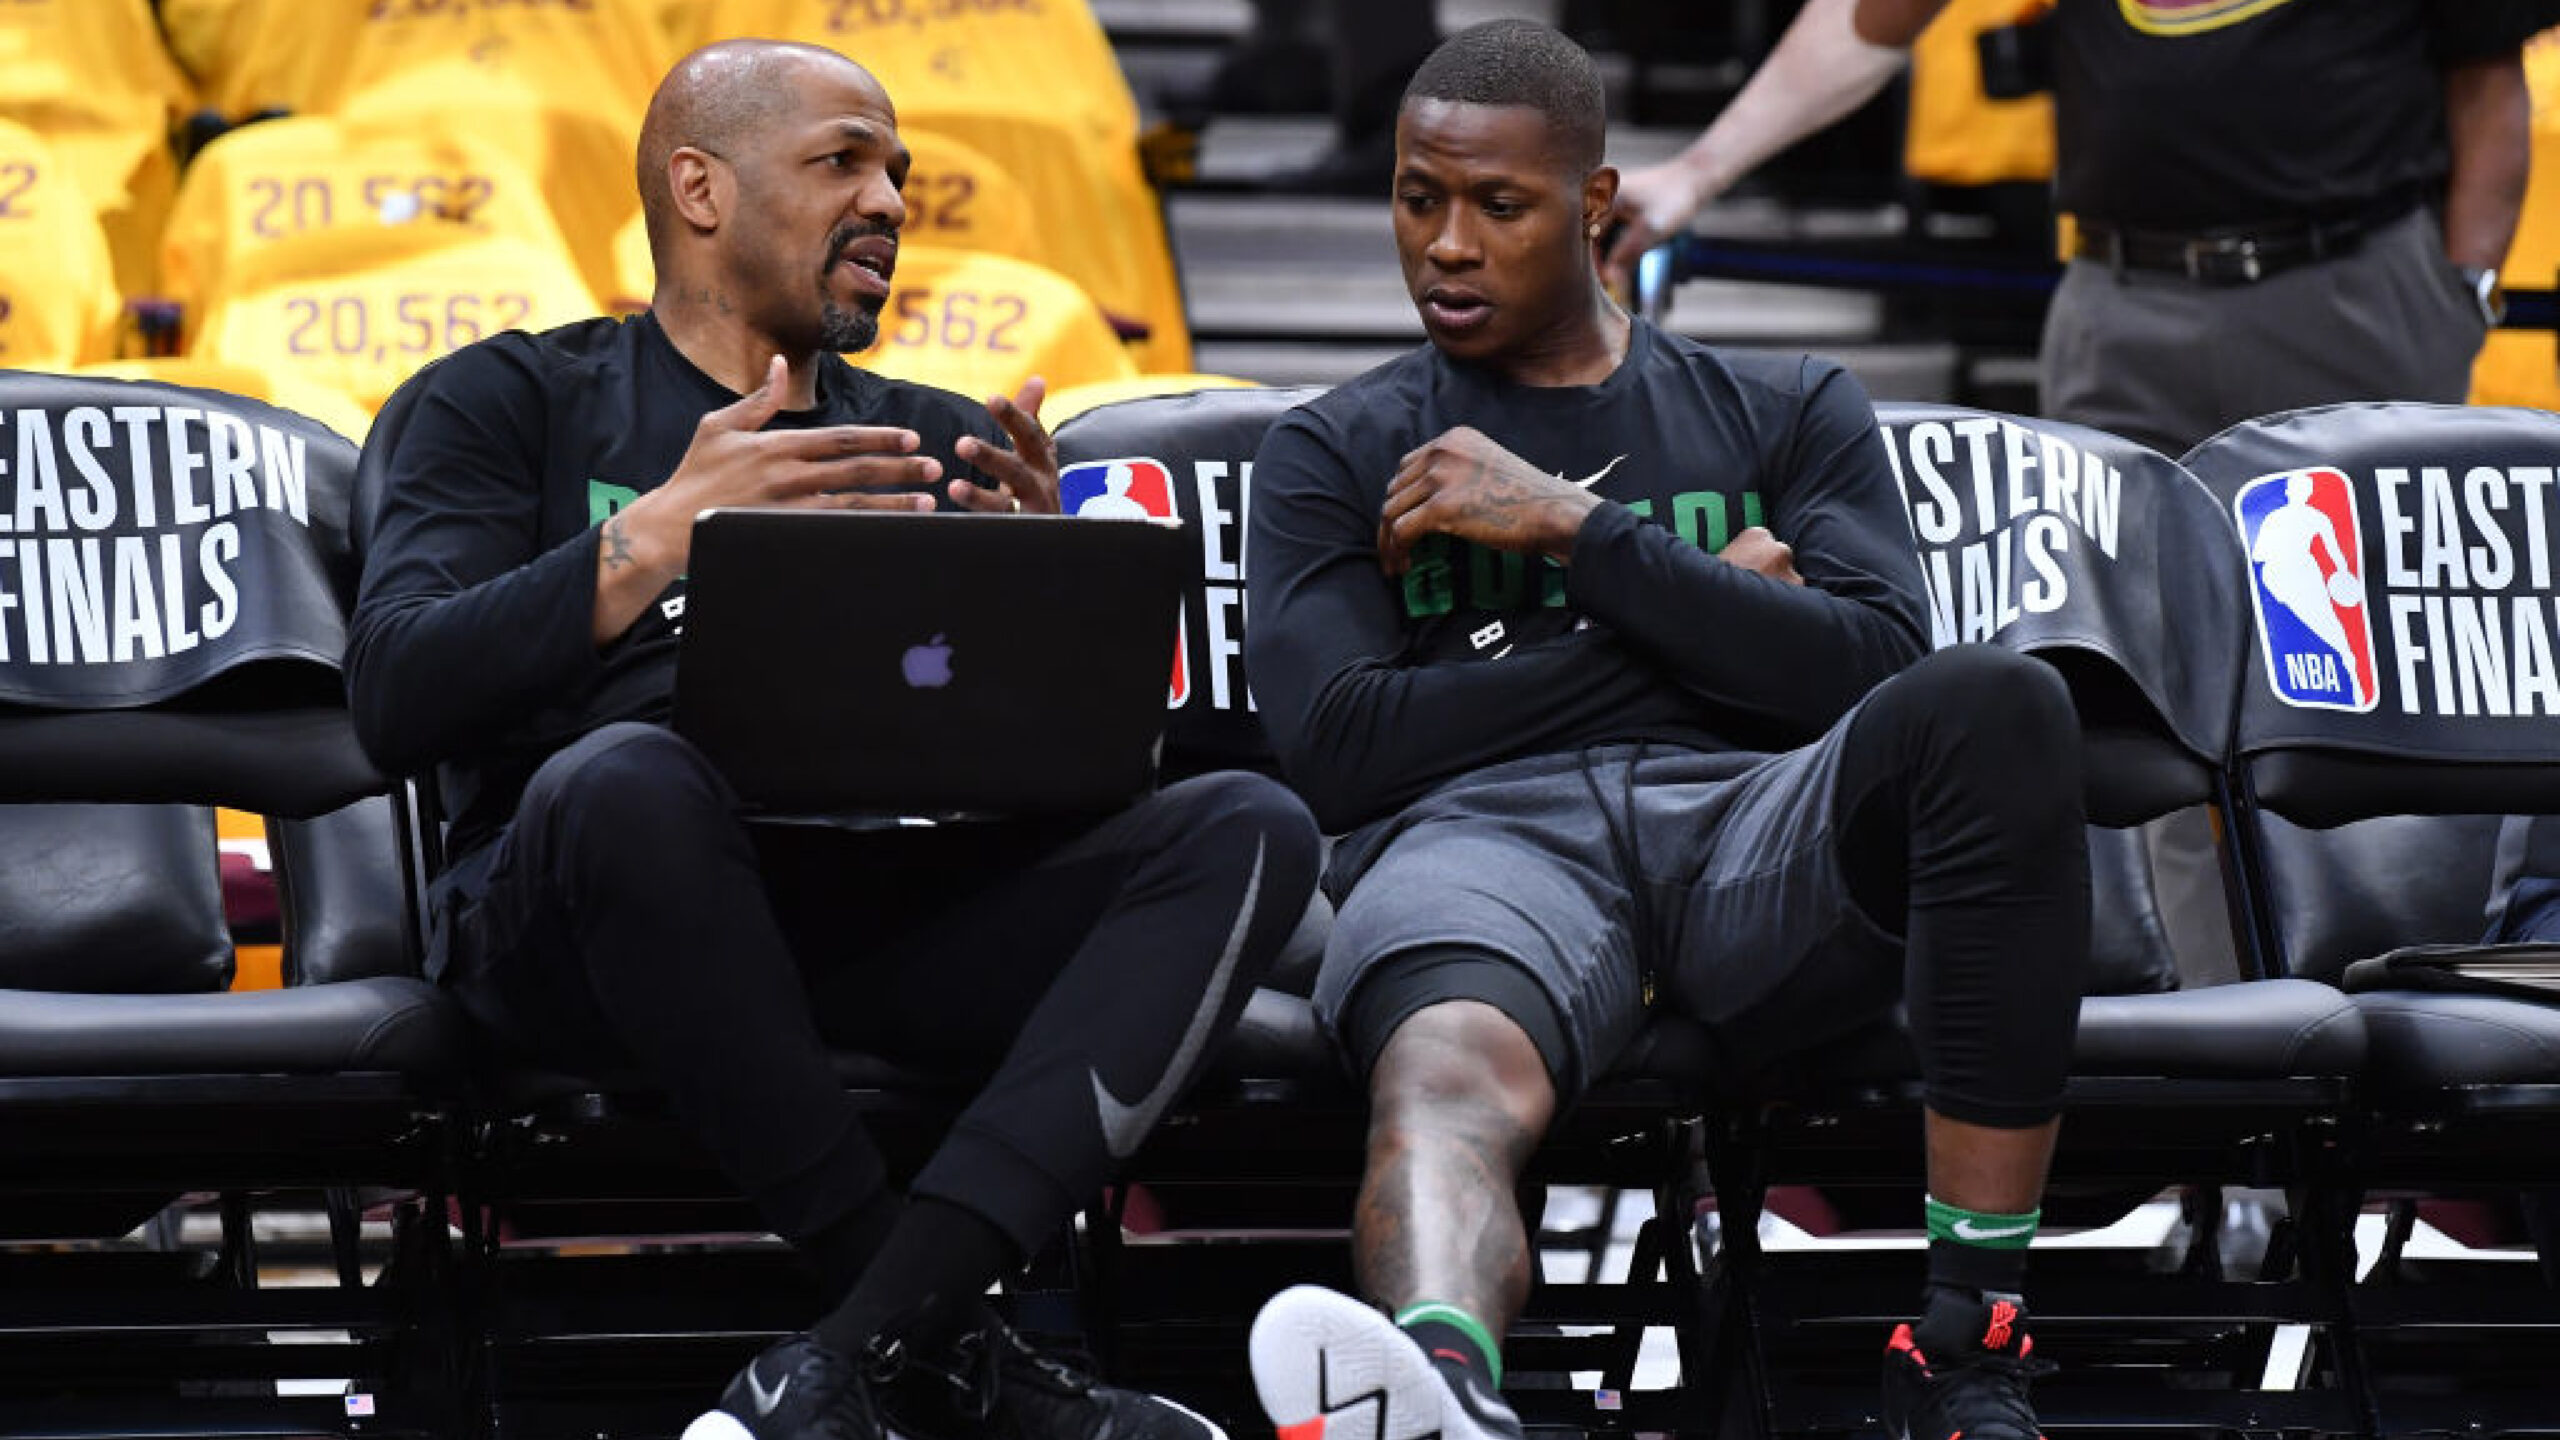 CLEVELAND, OH - MAY 21: Boston Celtics assistant coach Jerome Allen speaks to Terry Rozier #12 before Game Four of the 2018 NBA Eastern Conference Finals against the Cleveland Cavaliers at Quicken Loans Arena on May 21, 2018 in Cleveland, Ohio. (Photo by Jamie Sabau/Getty Images)